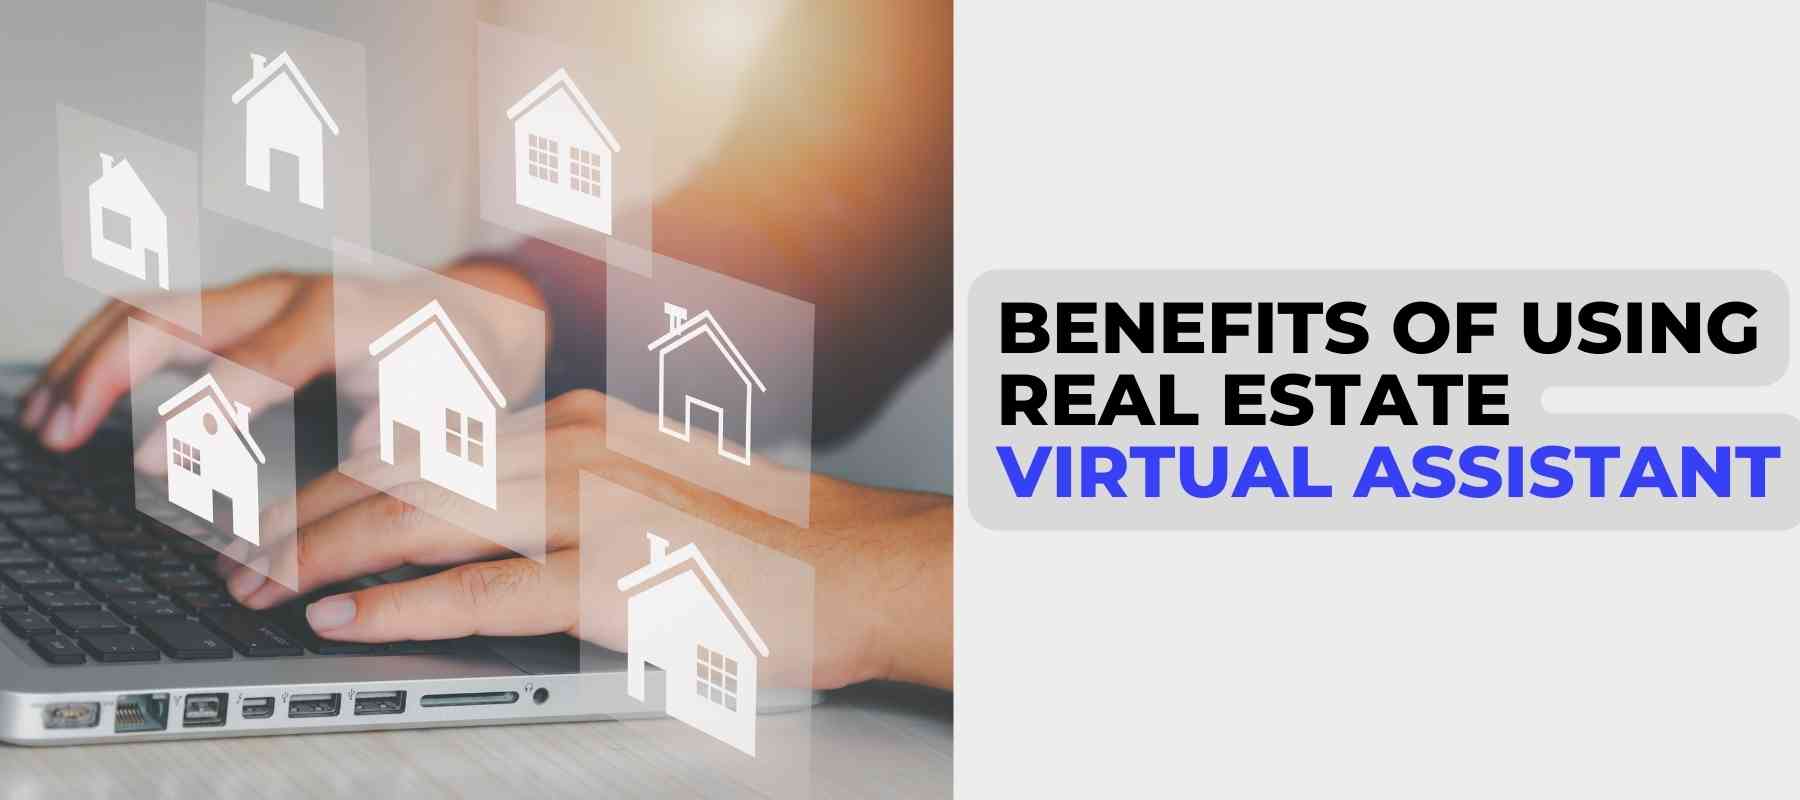 Benefits of Using Real Estate Virtual Assistant